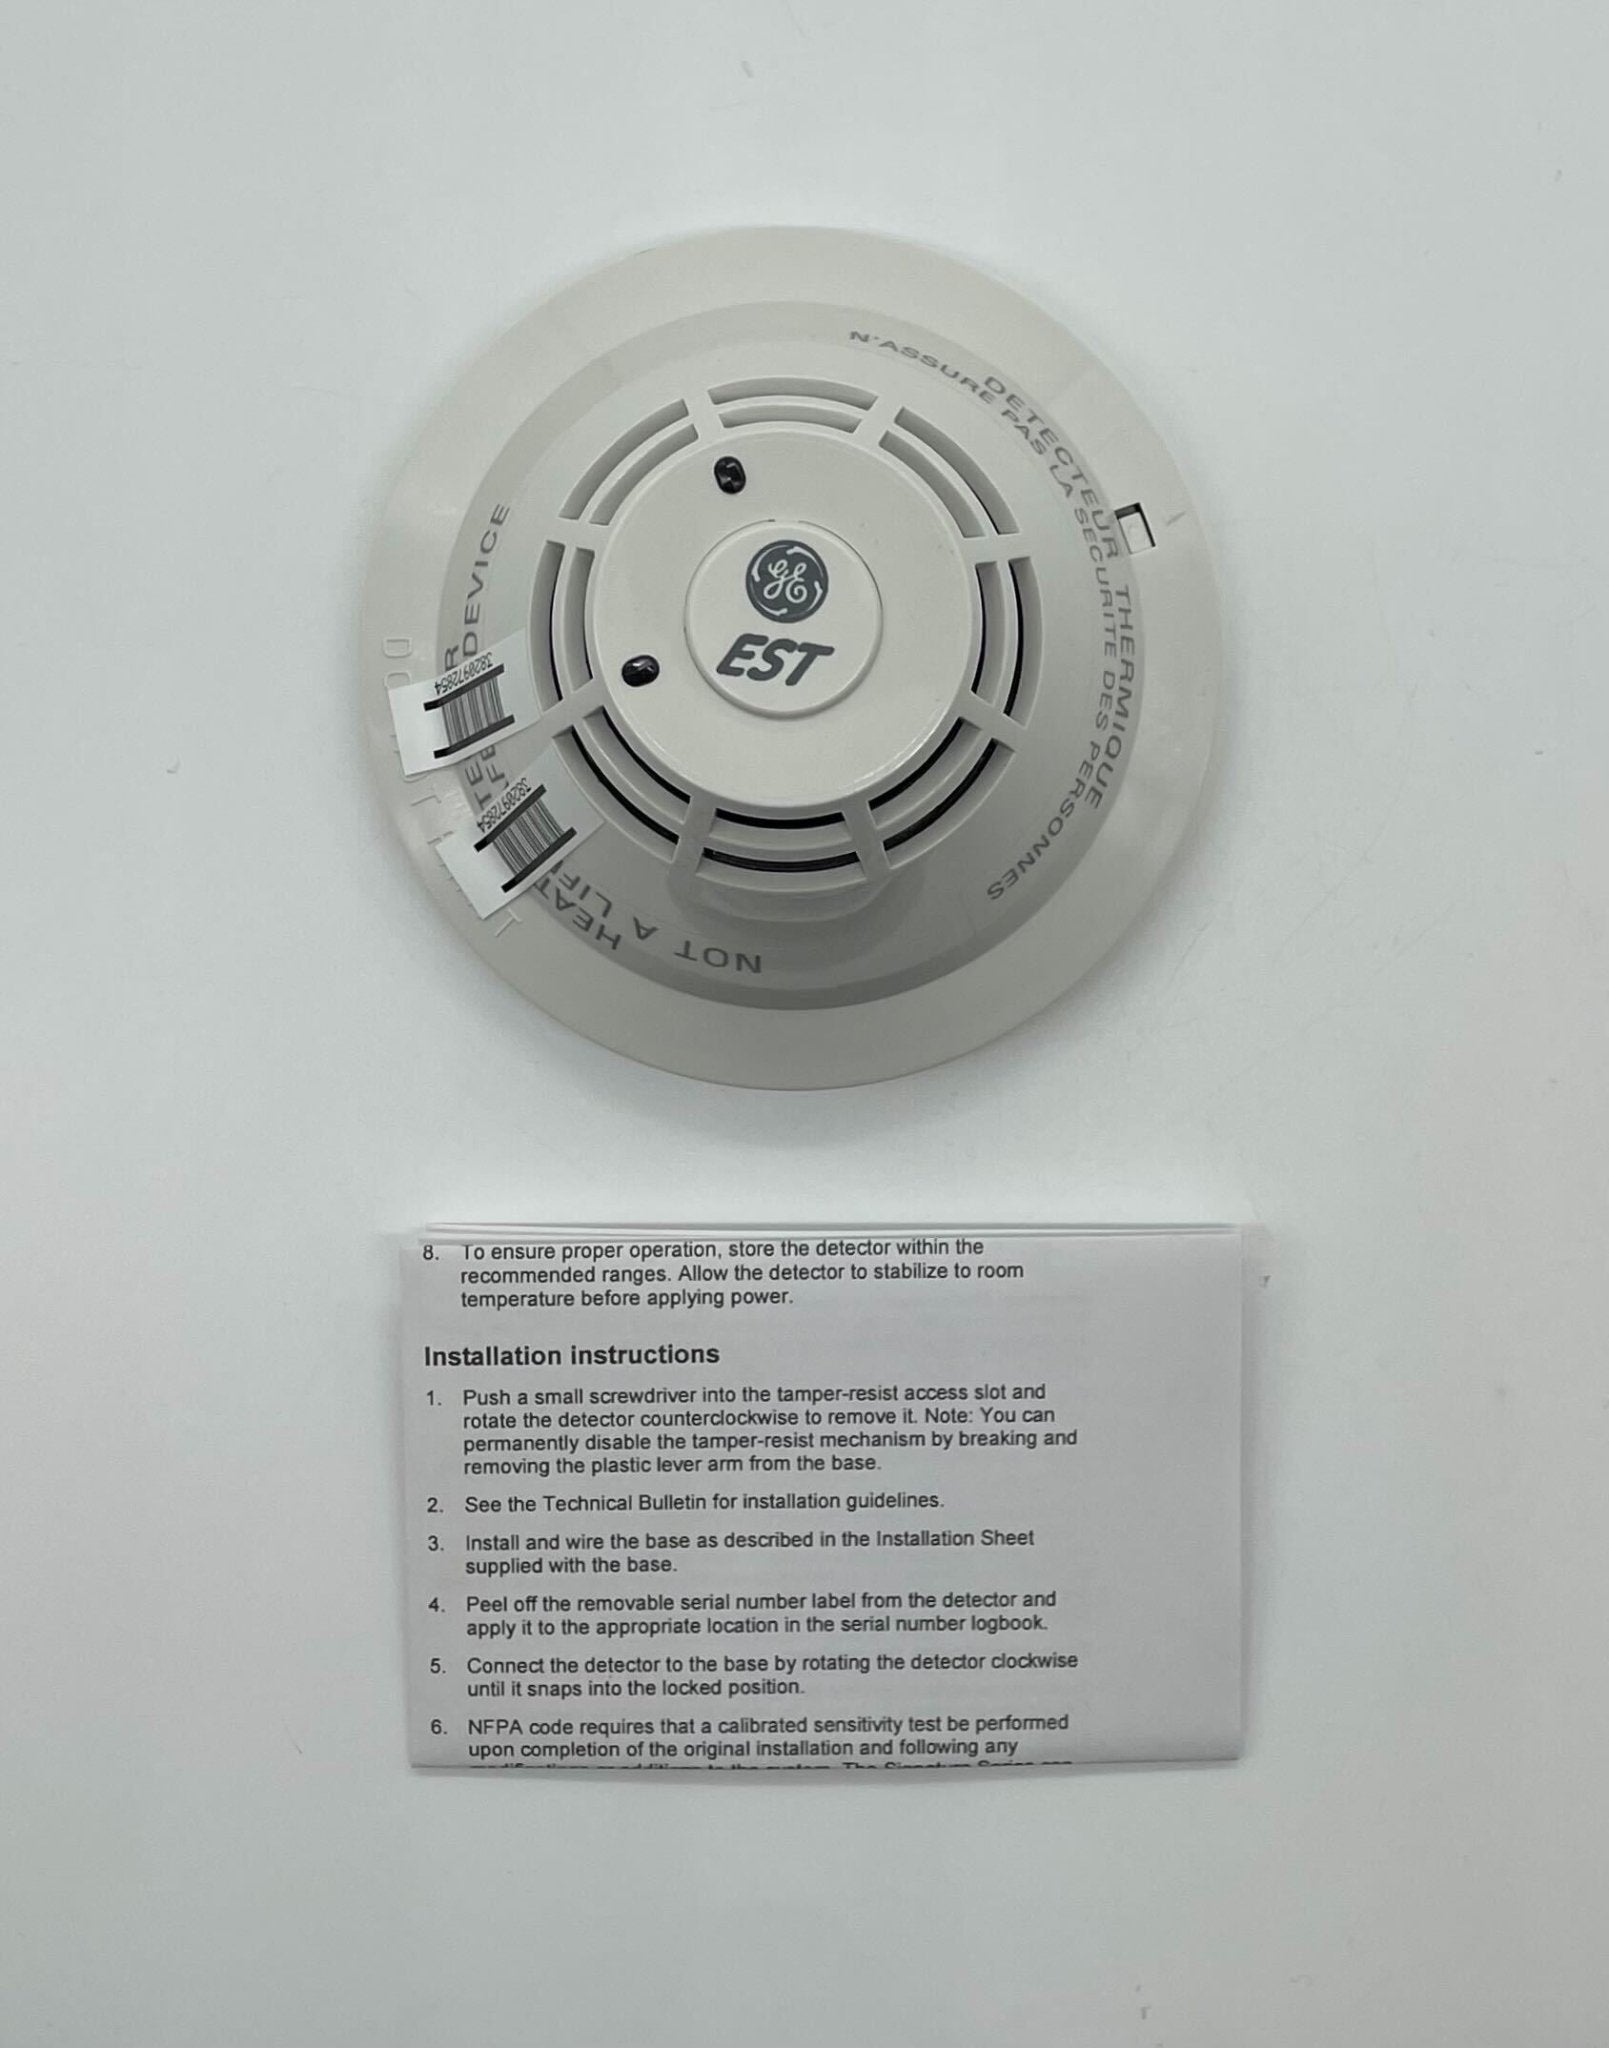 Edwards SIGA-HRS - The Fire Alarm Supplier